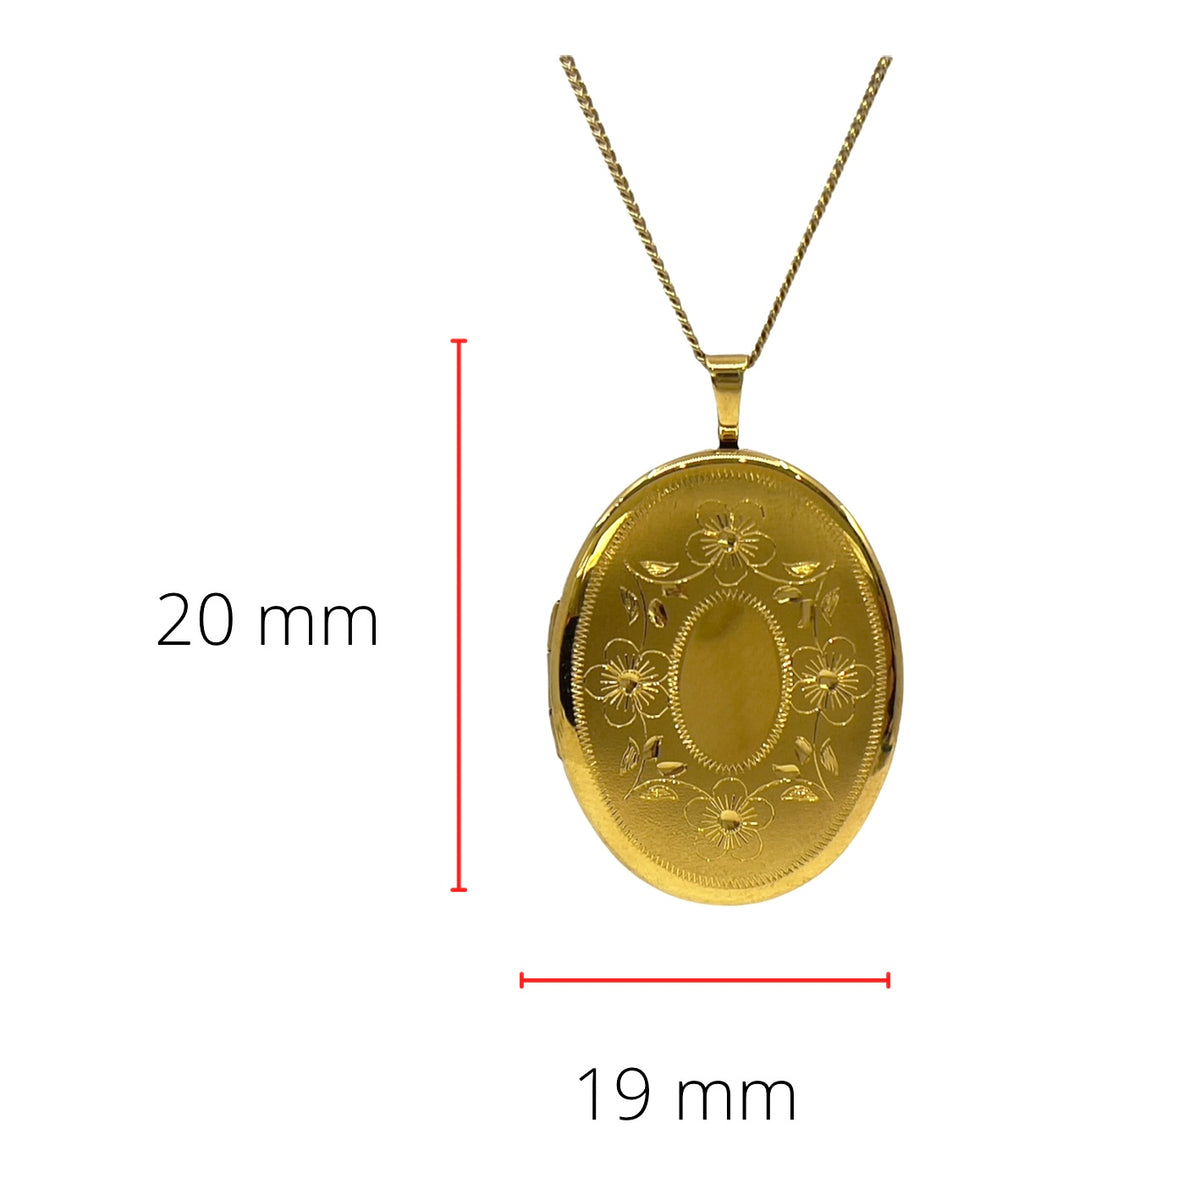 Gold Plated on 925 Sterling Silver Oval Shaped Locket with Etched FLoral Design - 26mm x 21mm